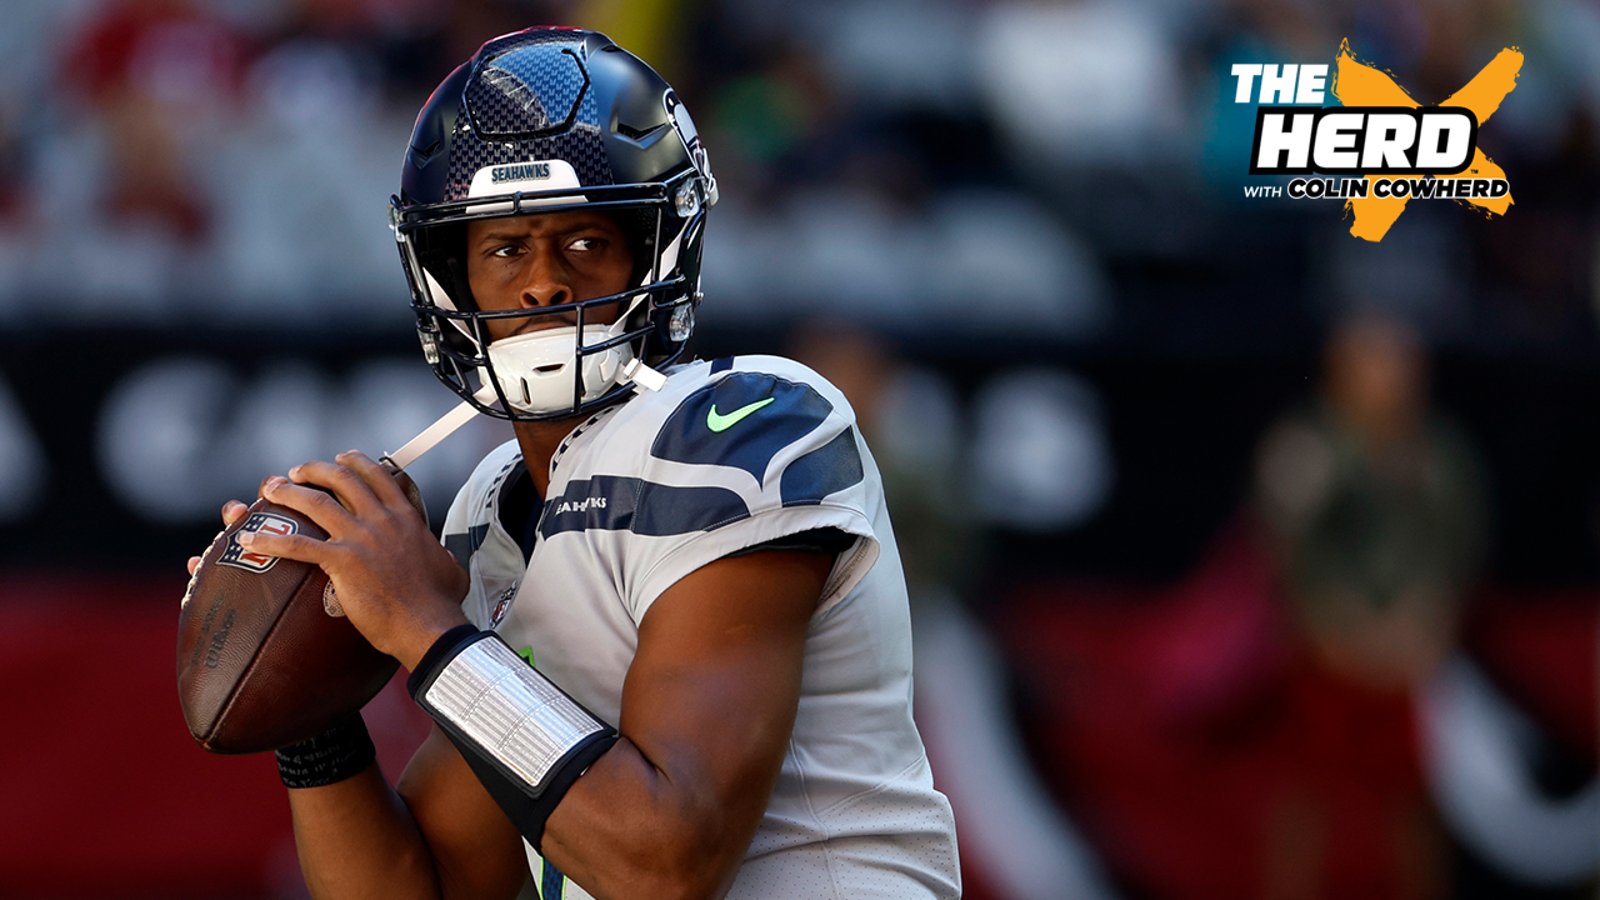 What's been the key to Geno Smith, Seahawks success?